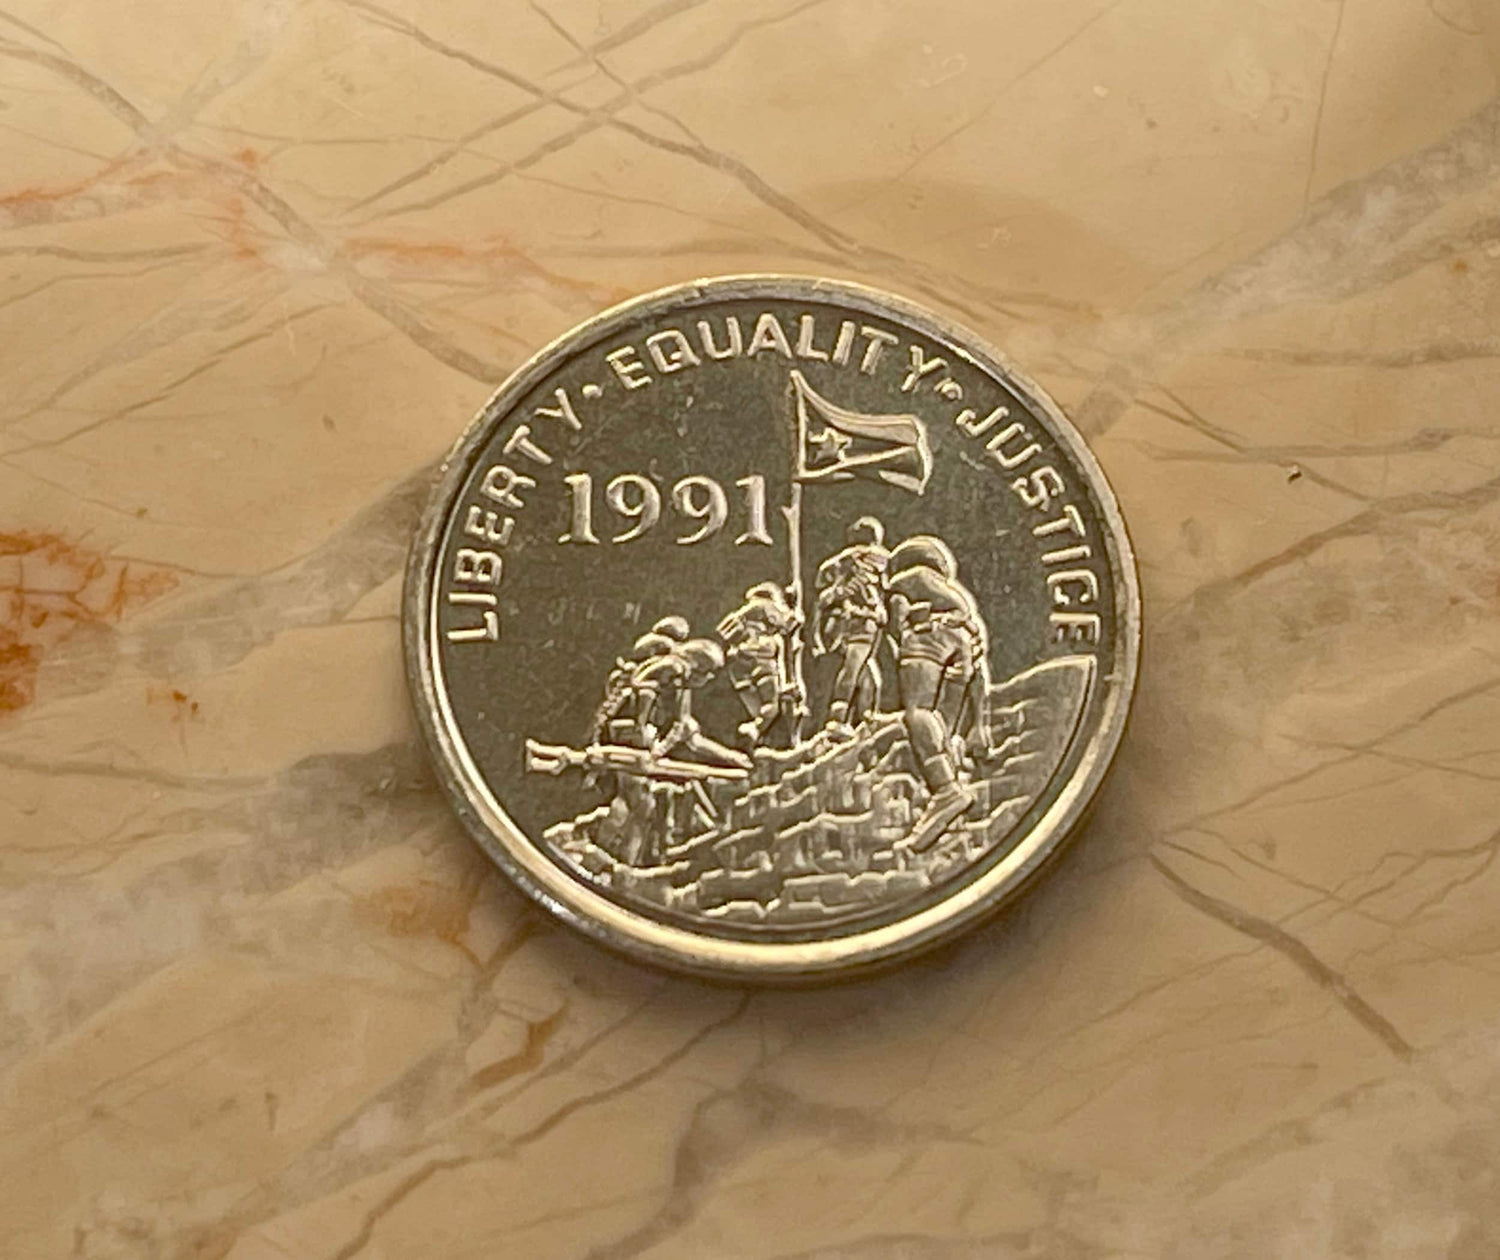 Liberty Equality Justice & Gazelle Penny Eritrea Authentic Coin Money for Jewelry and Craft Making